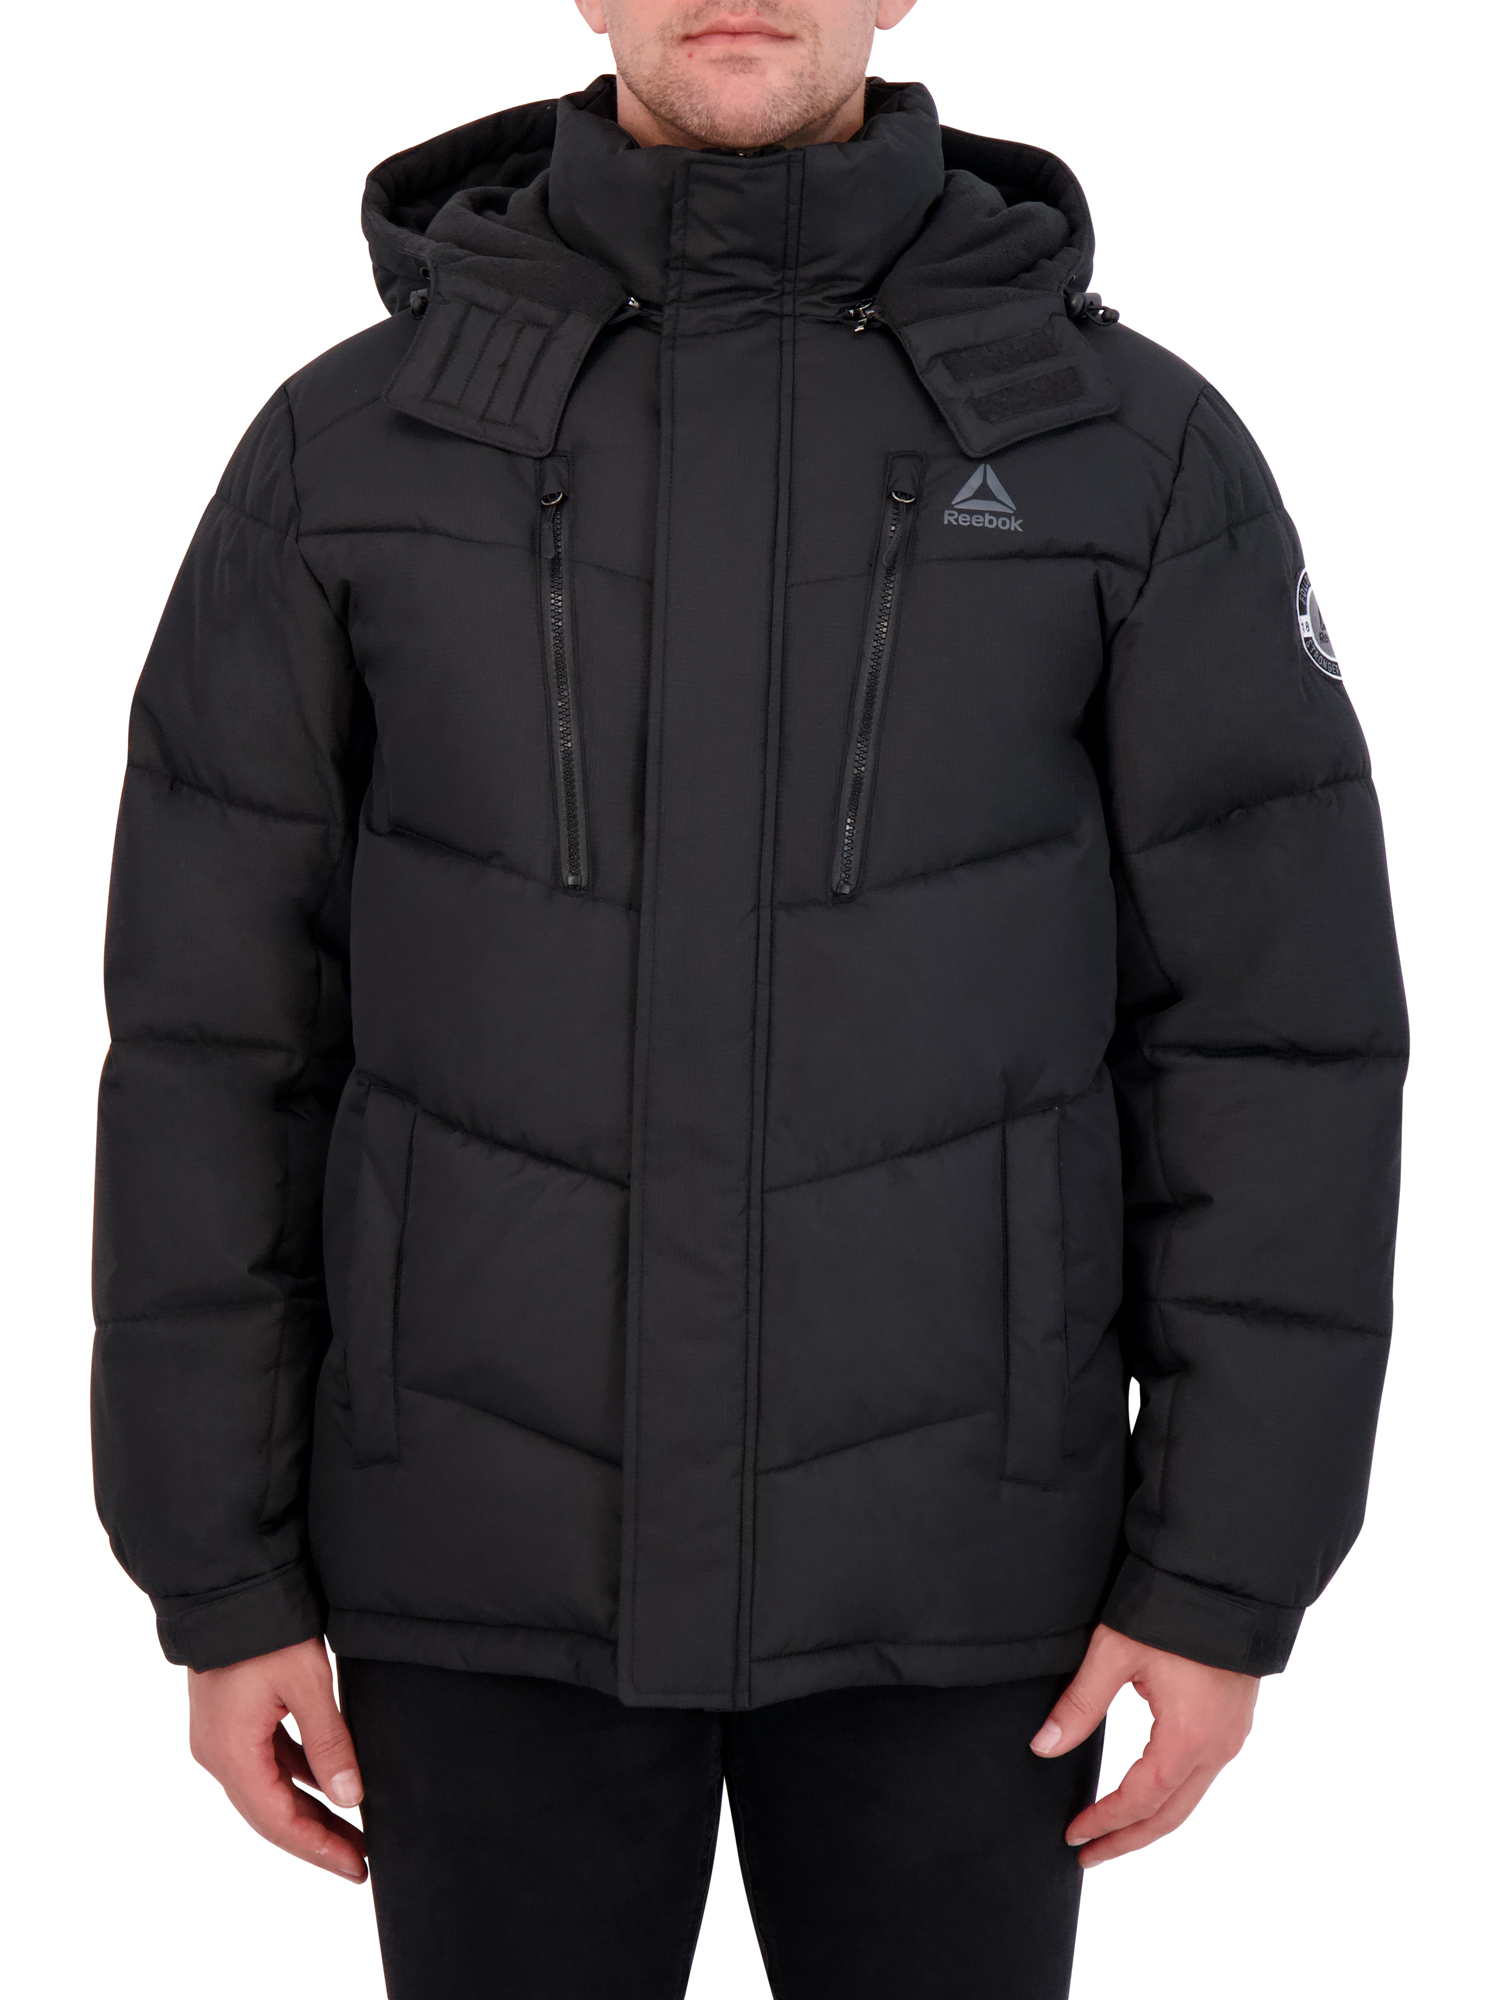 Reebok Men's Hooded Puffer Jacket, Up to Size 2XL - image 1 of 4